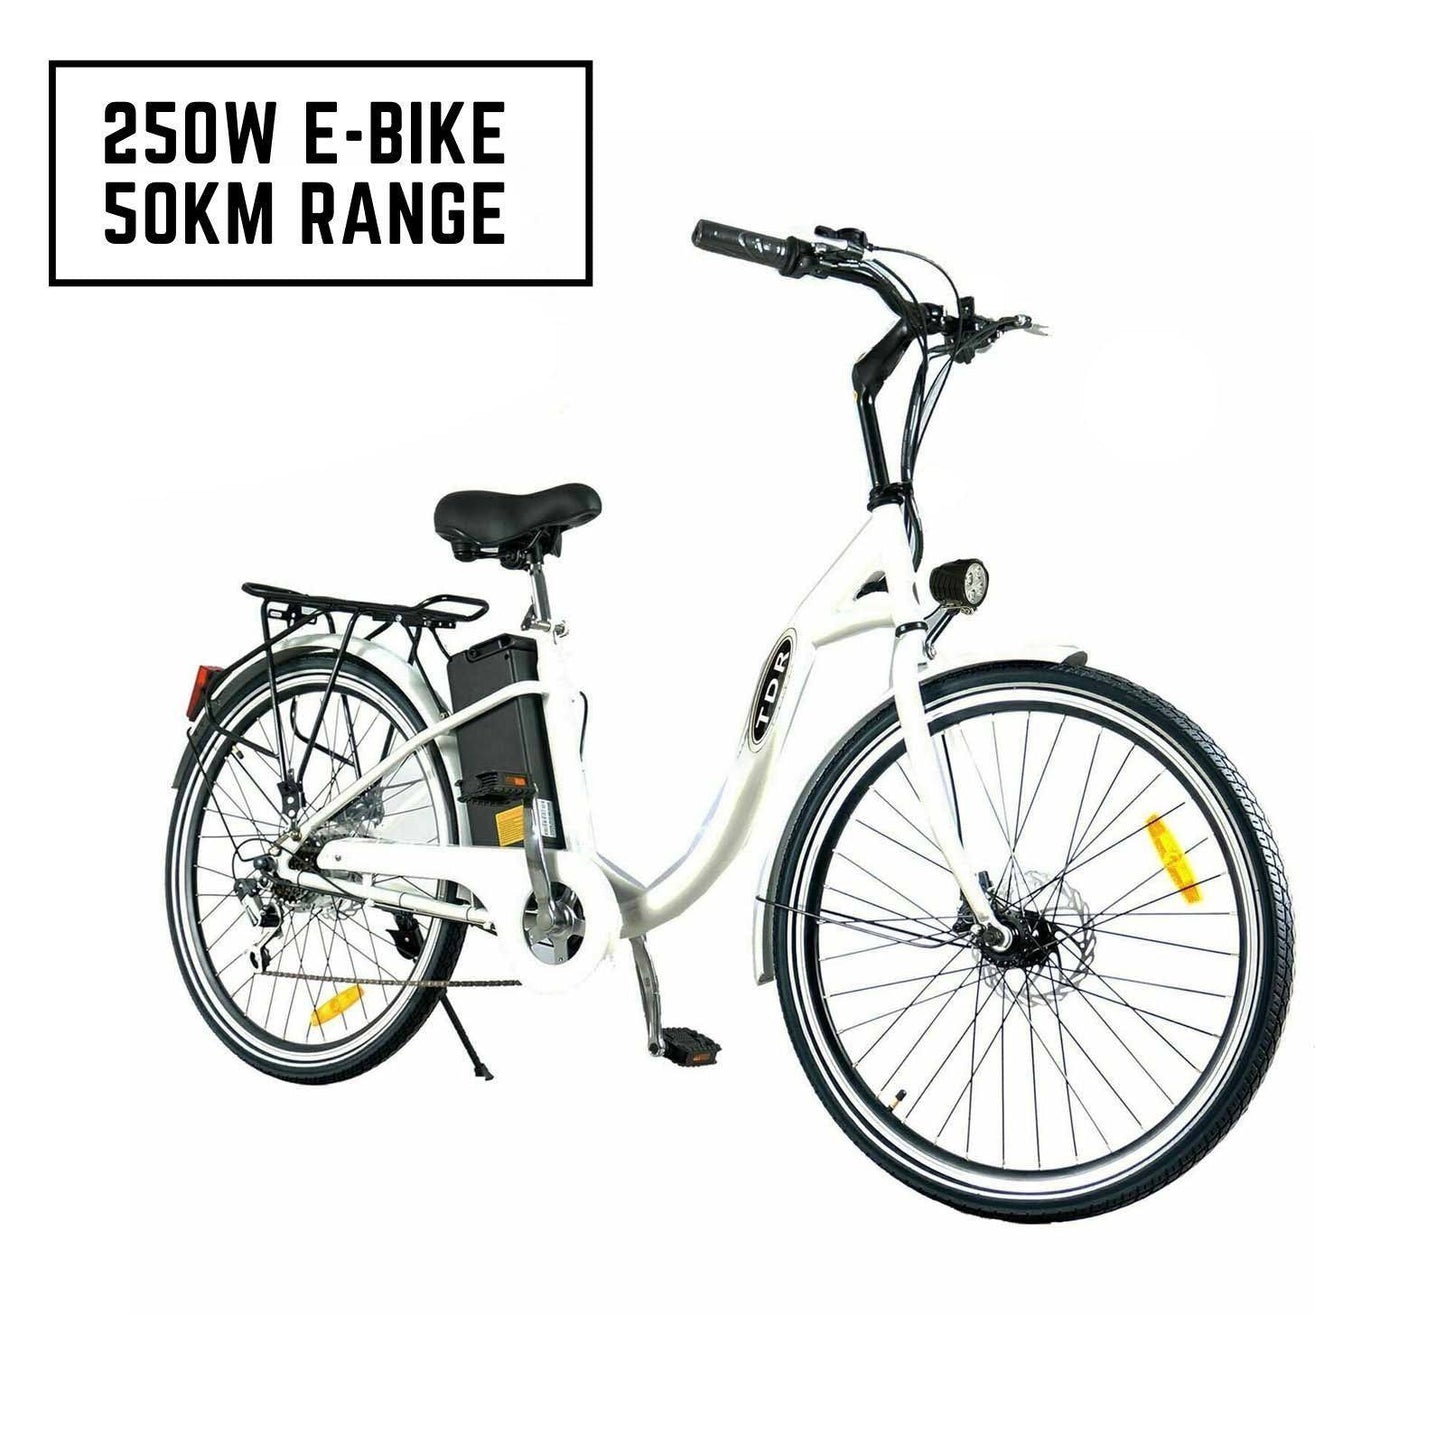 TDR 250W 26" White Electric Bike with 10Ah Lithium Ion Battery - TDRMOTO